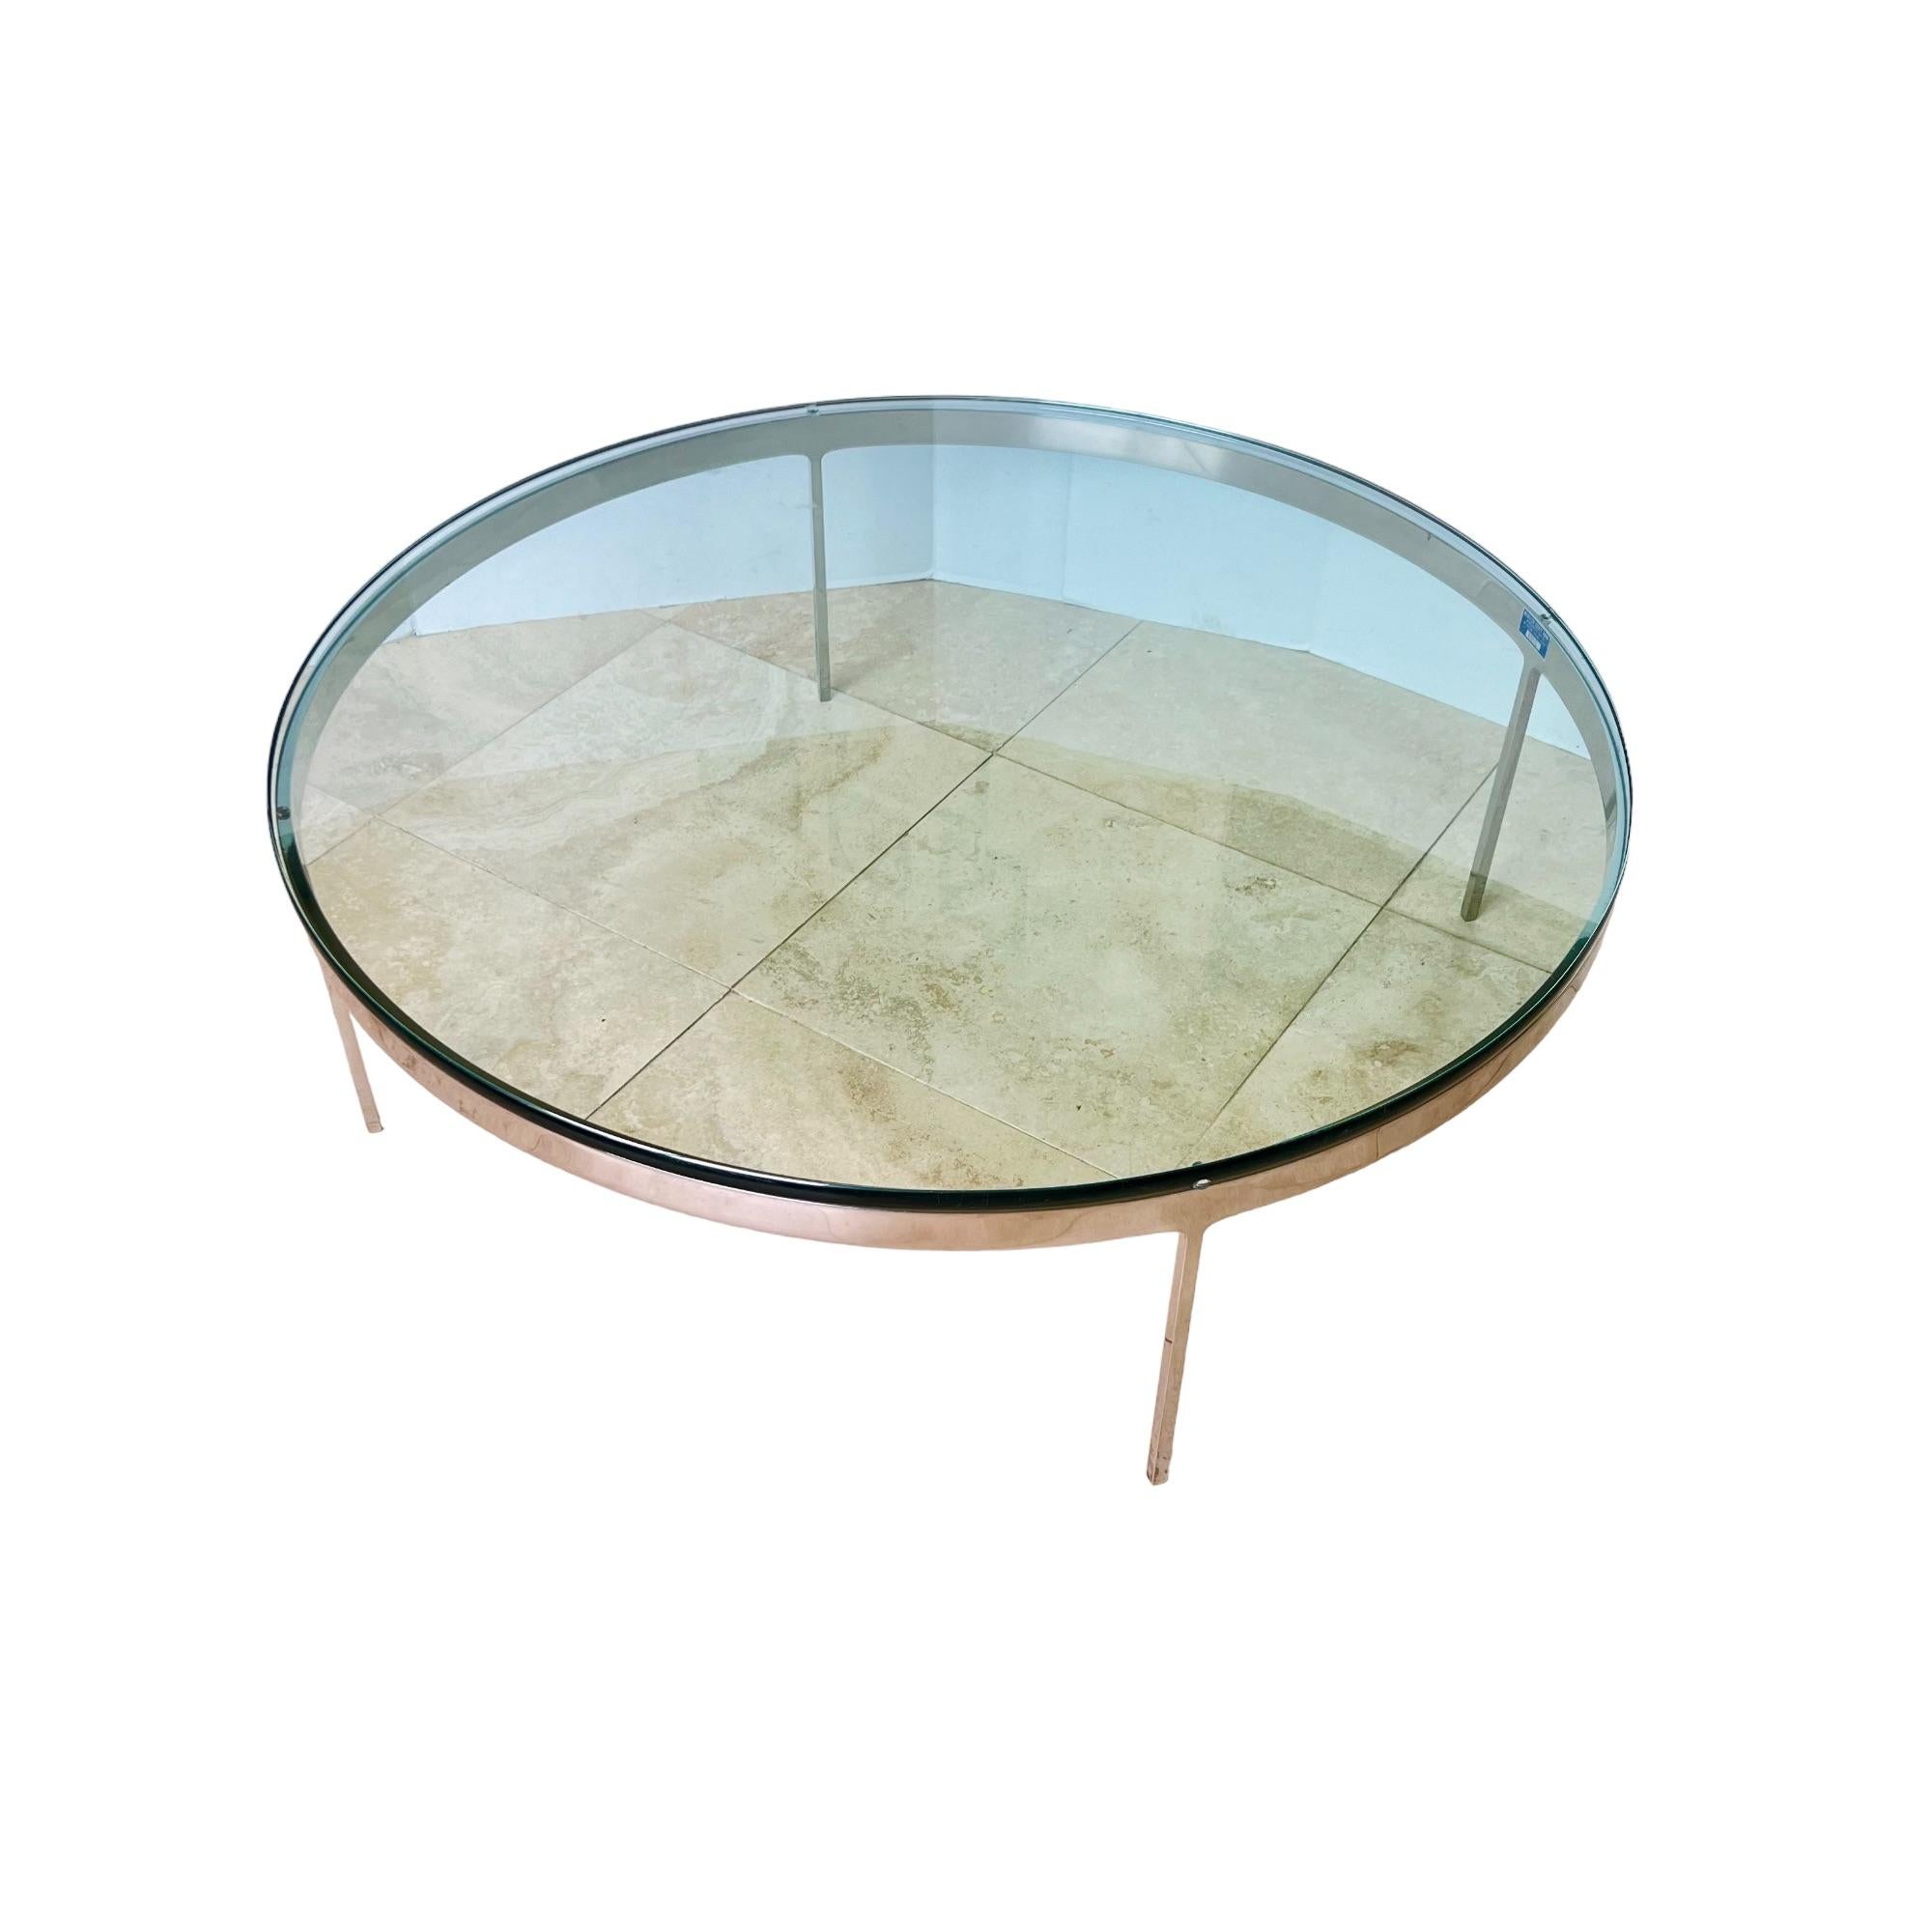 Metalwork Mid-Century Modern Nicos Zographos 35 Series Low Table For Sale